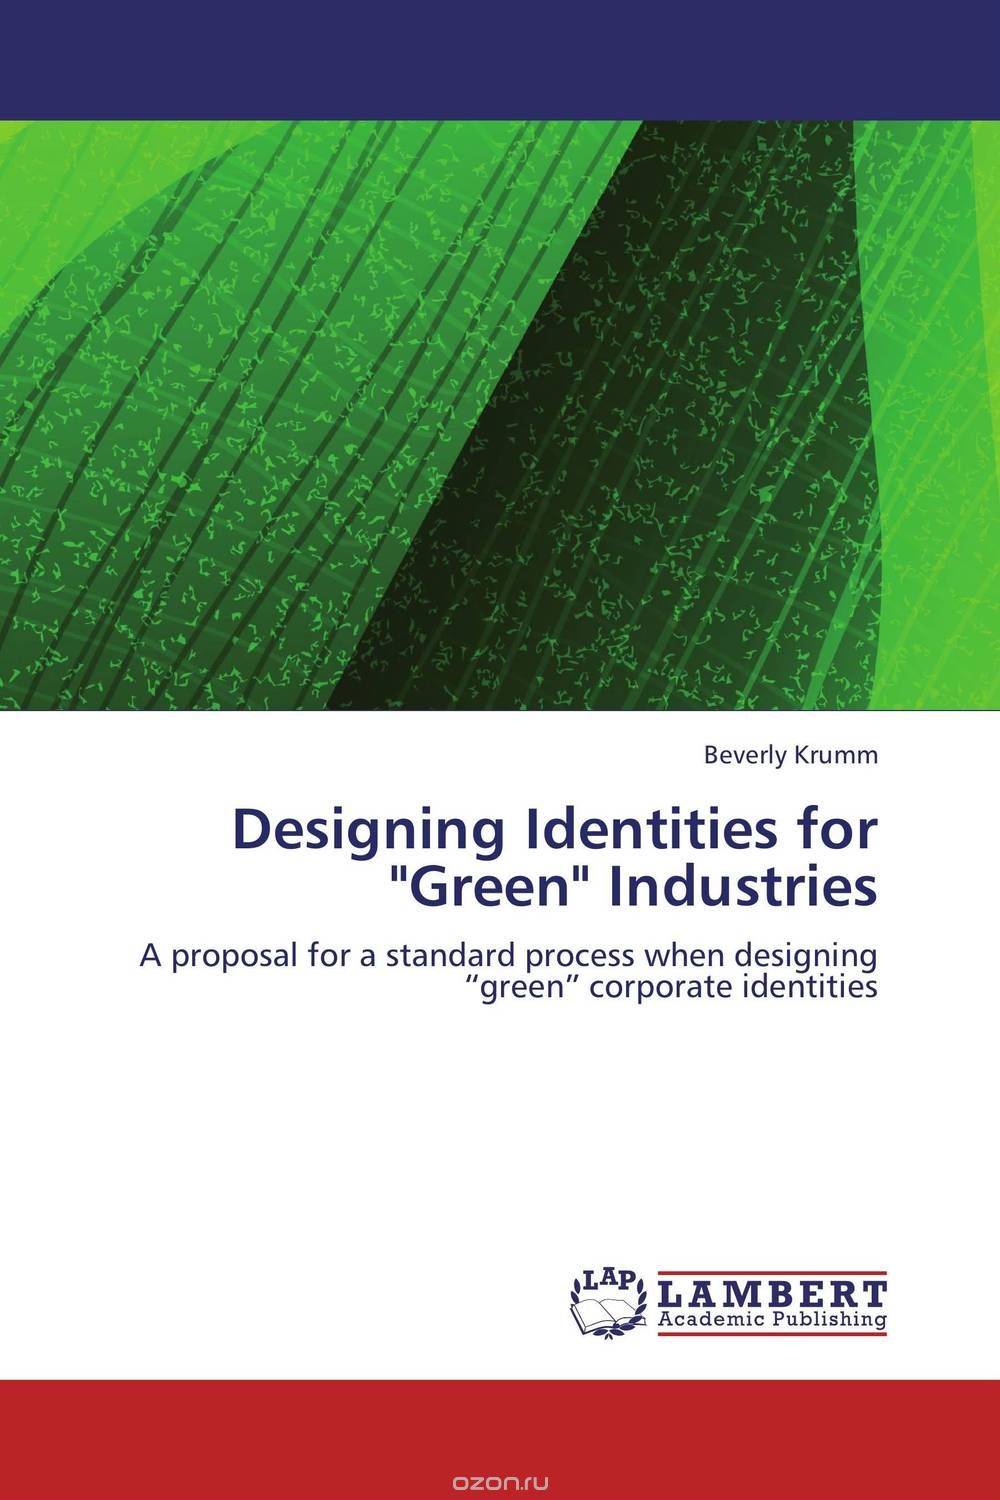 Designing Identities for "Green" Industries